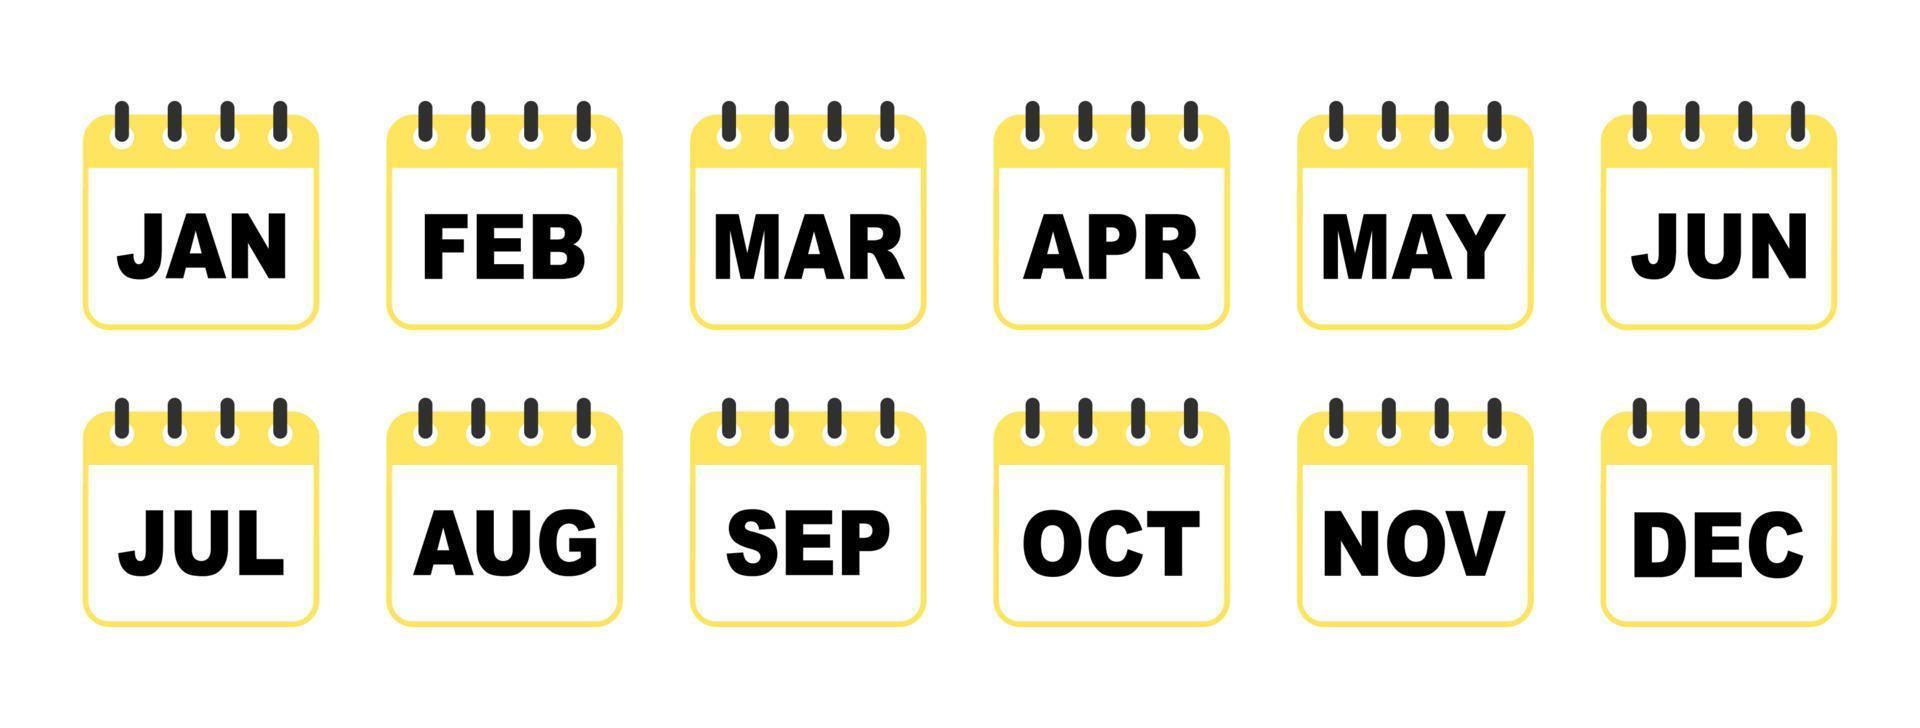 All months of the year in one set. Calendar set vector